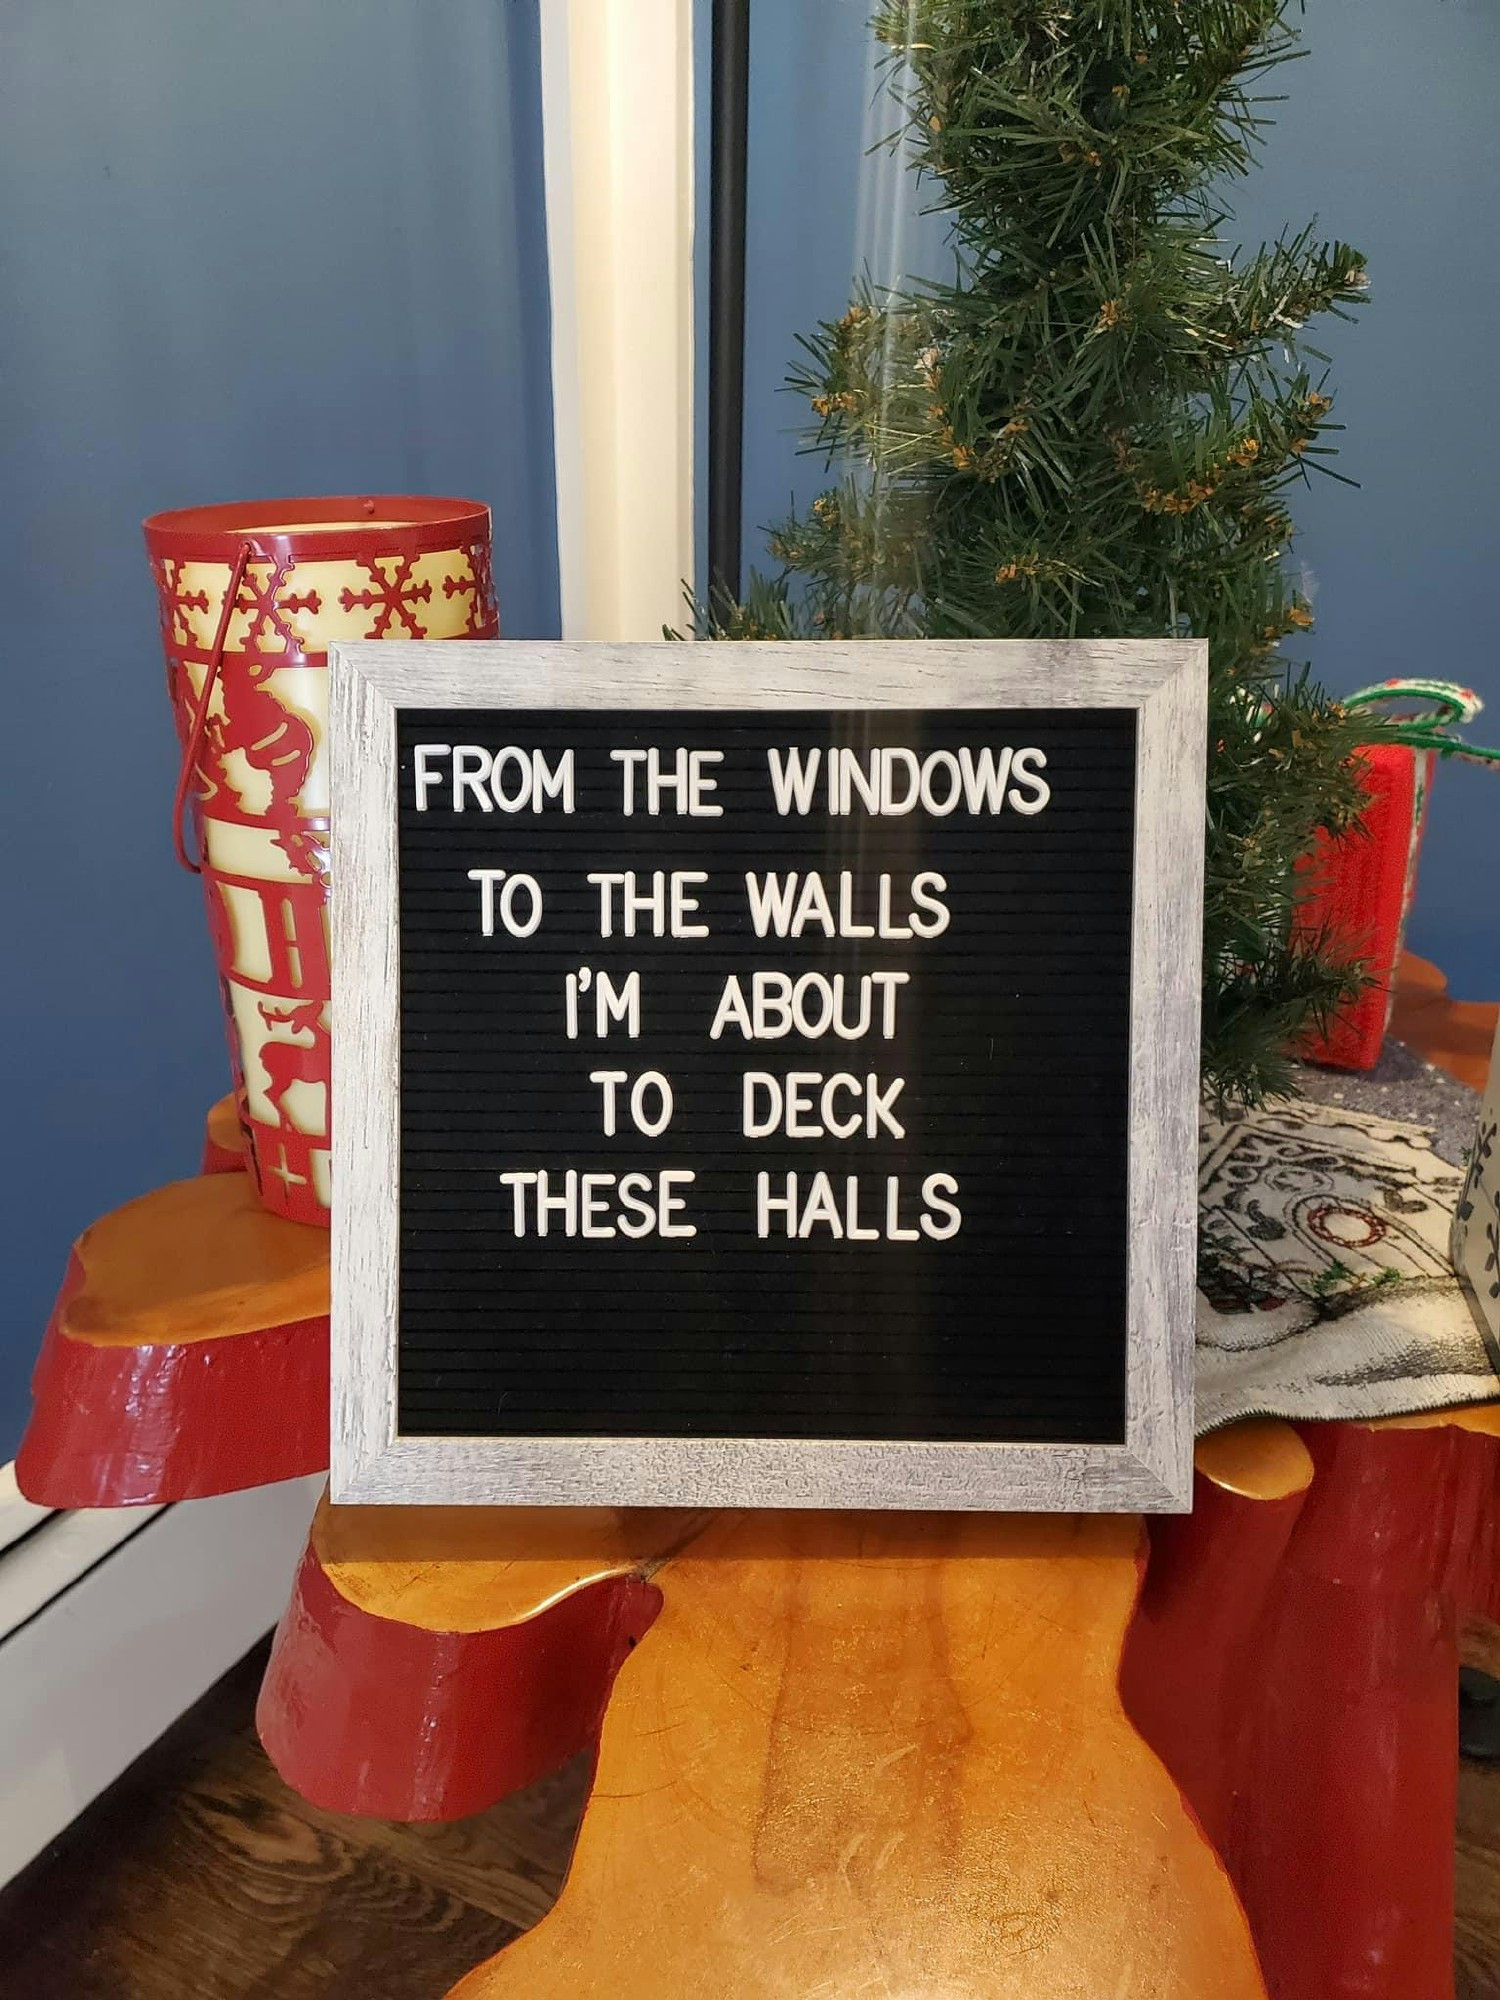 This is us.  100%.  We love Christmas, and we aren't afraid to tell the world.  We decorate the office to the nines! 